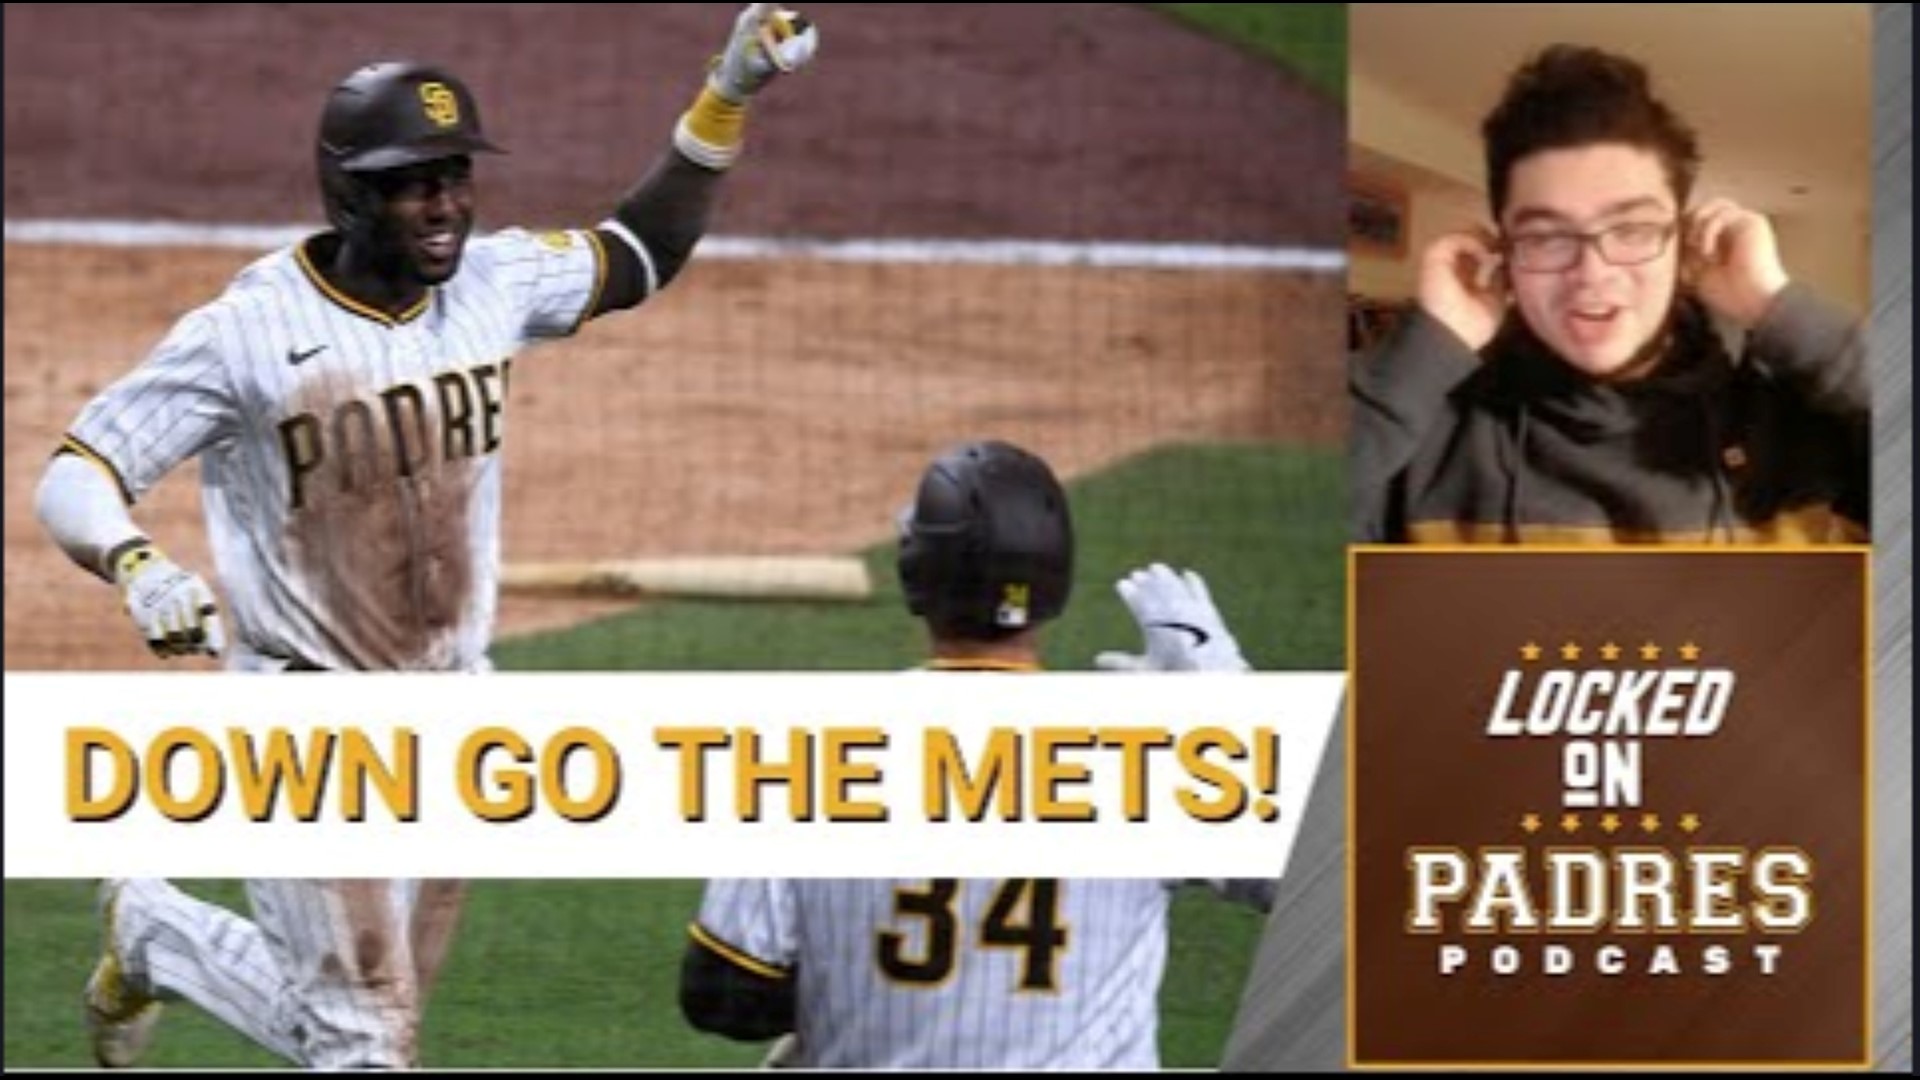 Javi recaps the series between the Mets & Padres featuring a whole lot of runs! He also talks about Profar turning into a leadoff hitter and Cronenworth getting hot.